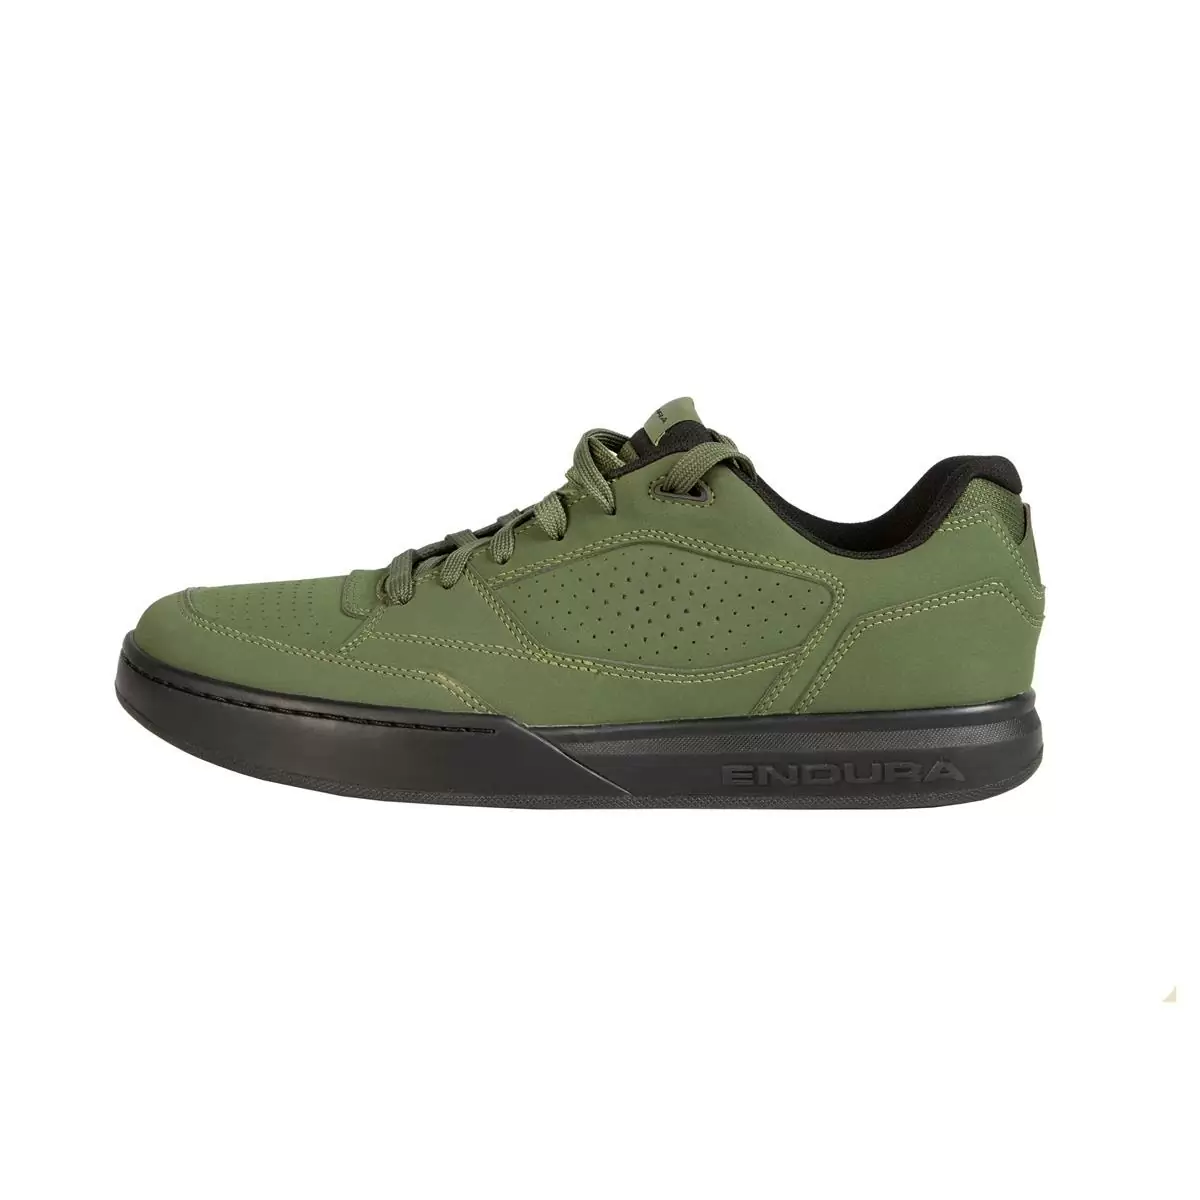 Hummvee Flat Pedal Shoes Green Size 42,5 #1